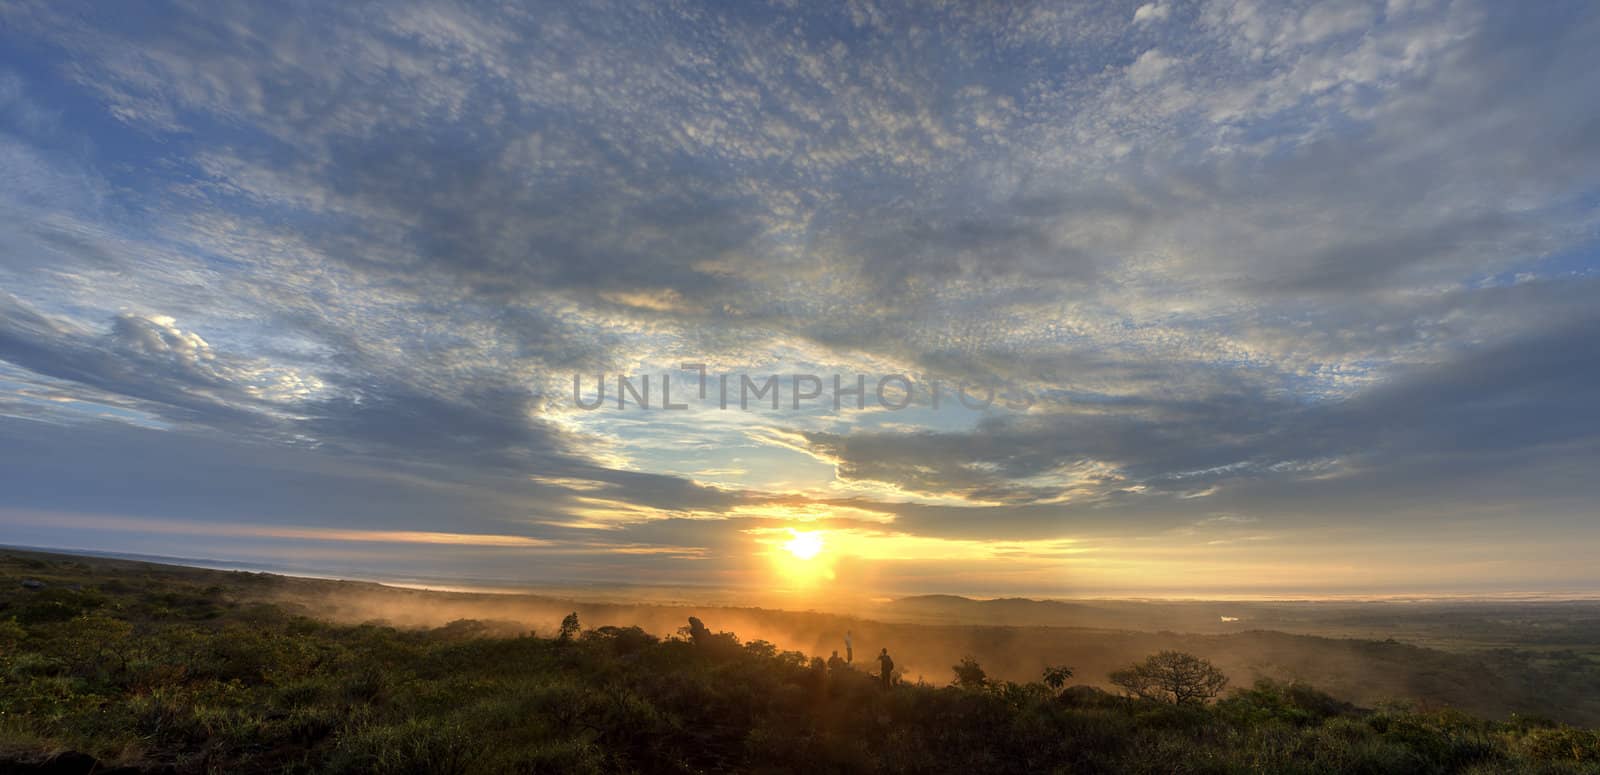 Sunrise in the Colombian plains with people in the foreground.